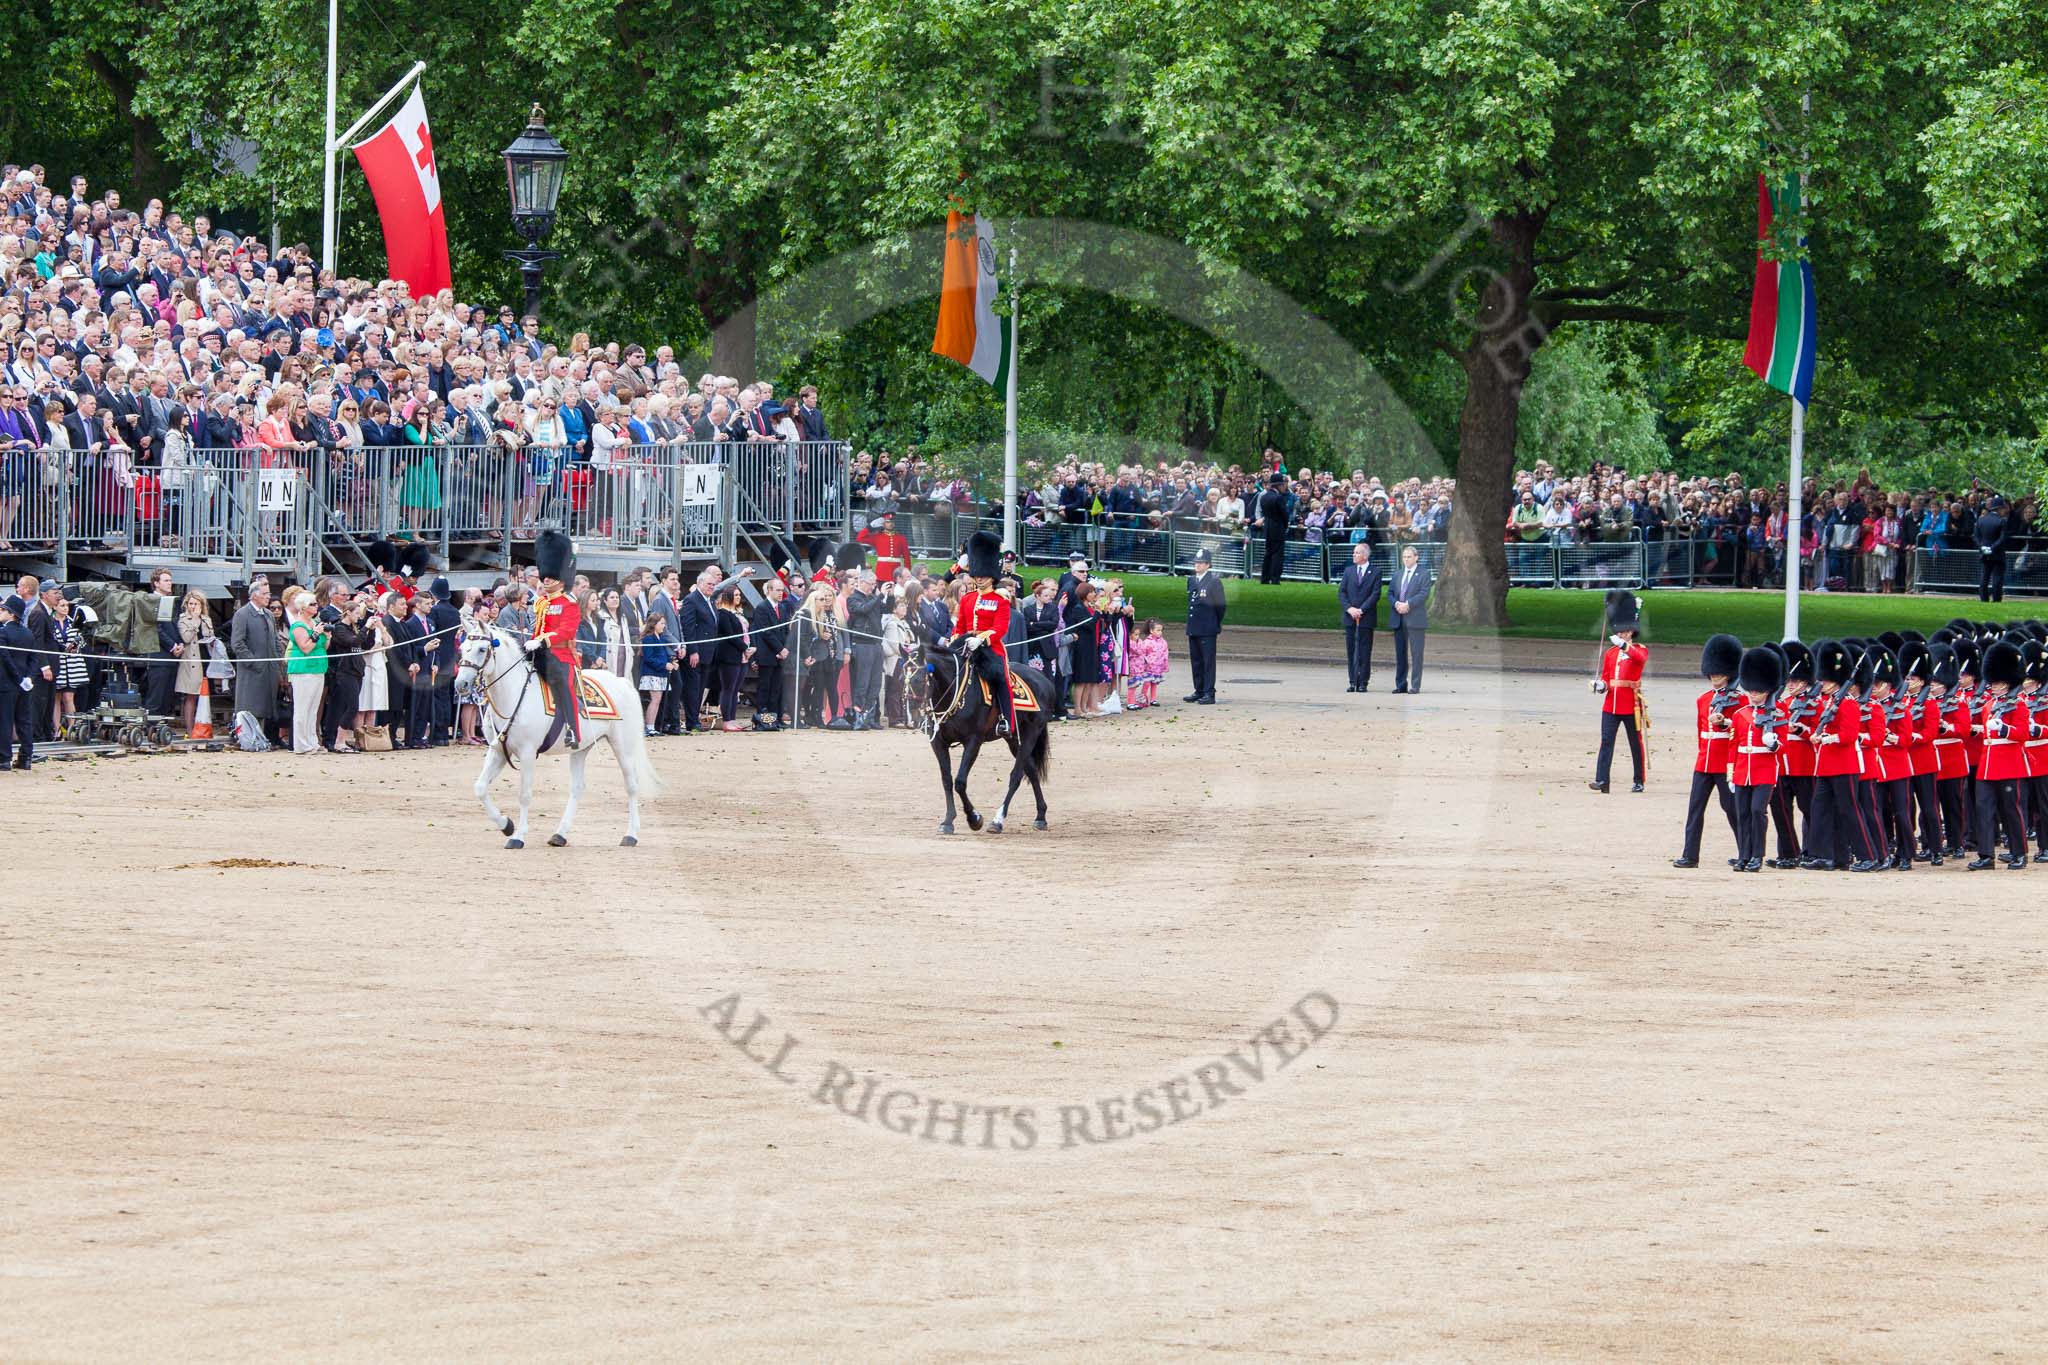 Trooping the Colour 2013: The March Past in Quick Time - led by the Field Officer and the Major of the Parade, the guards perform another ninety-degree-turn. Image #587, 15 June 2013 11:43 Horse Guards Parade, London, UK